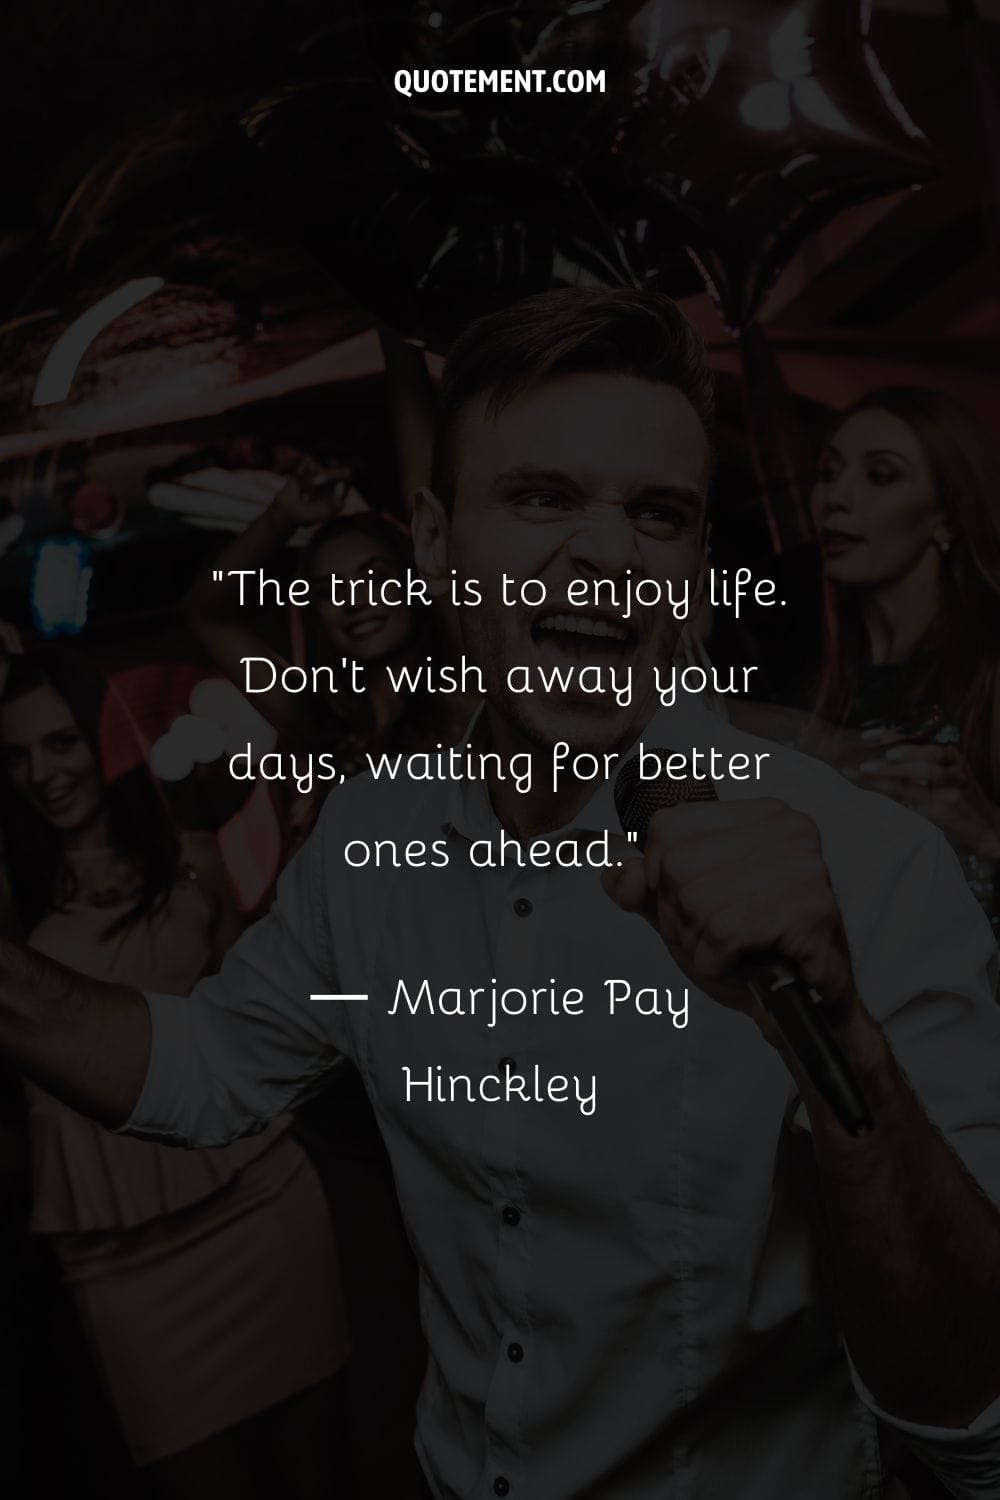 The trick is to enjoy life. Don't wish away your days, waiting for better ones ahead